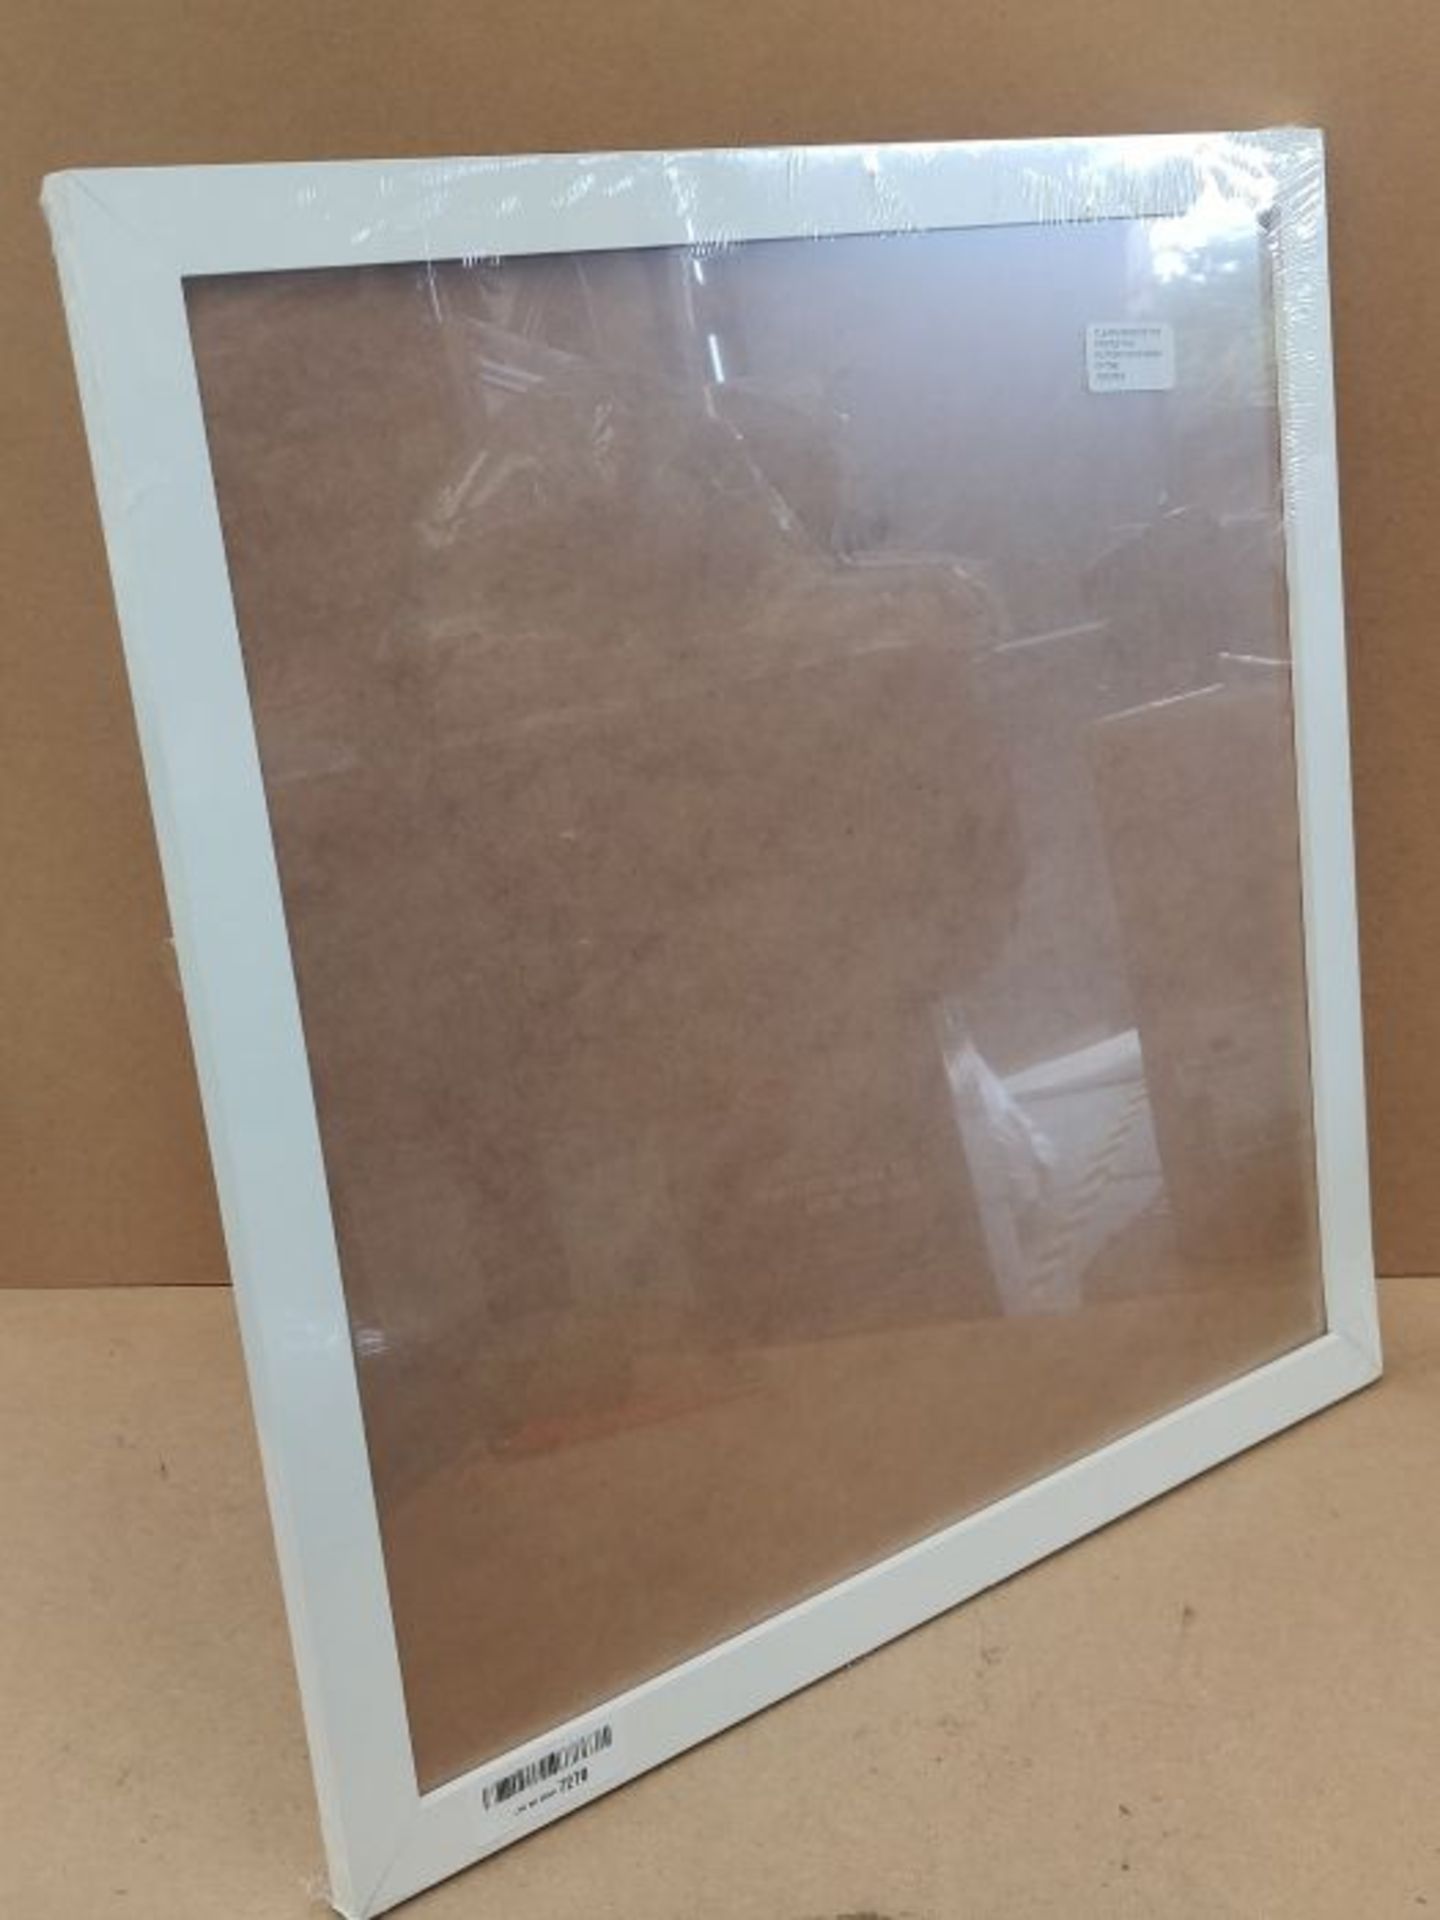 Picture Frames 50 x 50 cm Square White Photo Frames - Wall Hanging/Poster Frame With A - Image 2 of 2